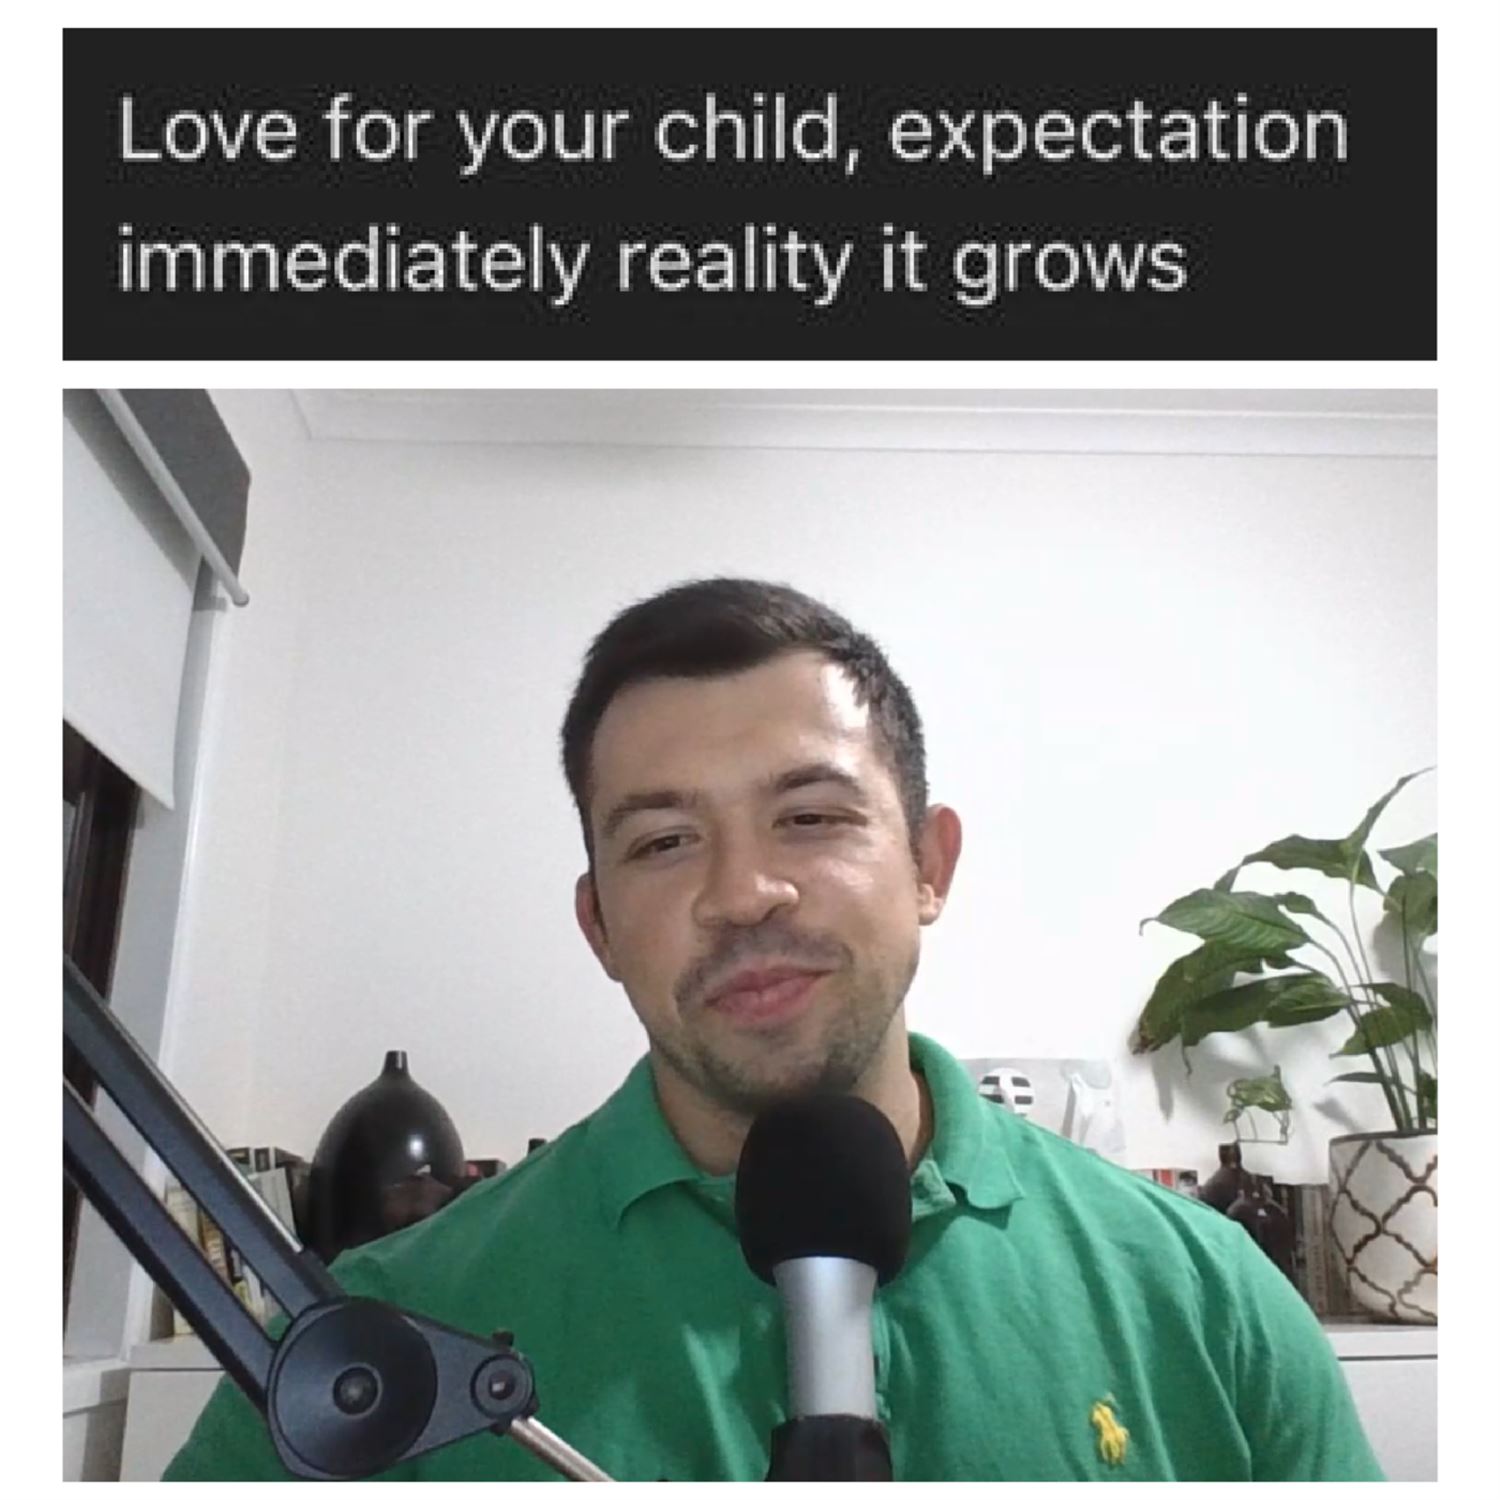 The love for your child